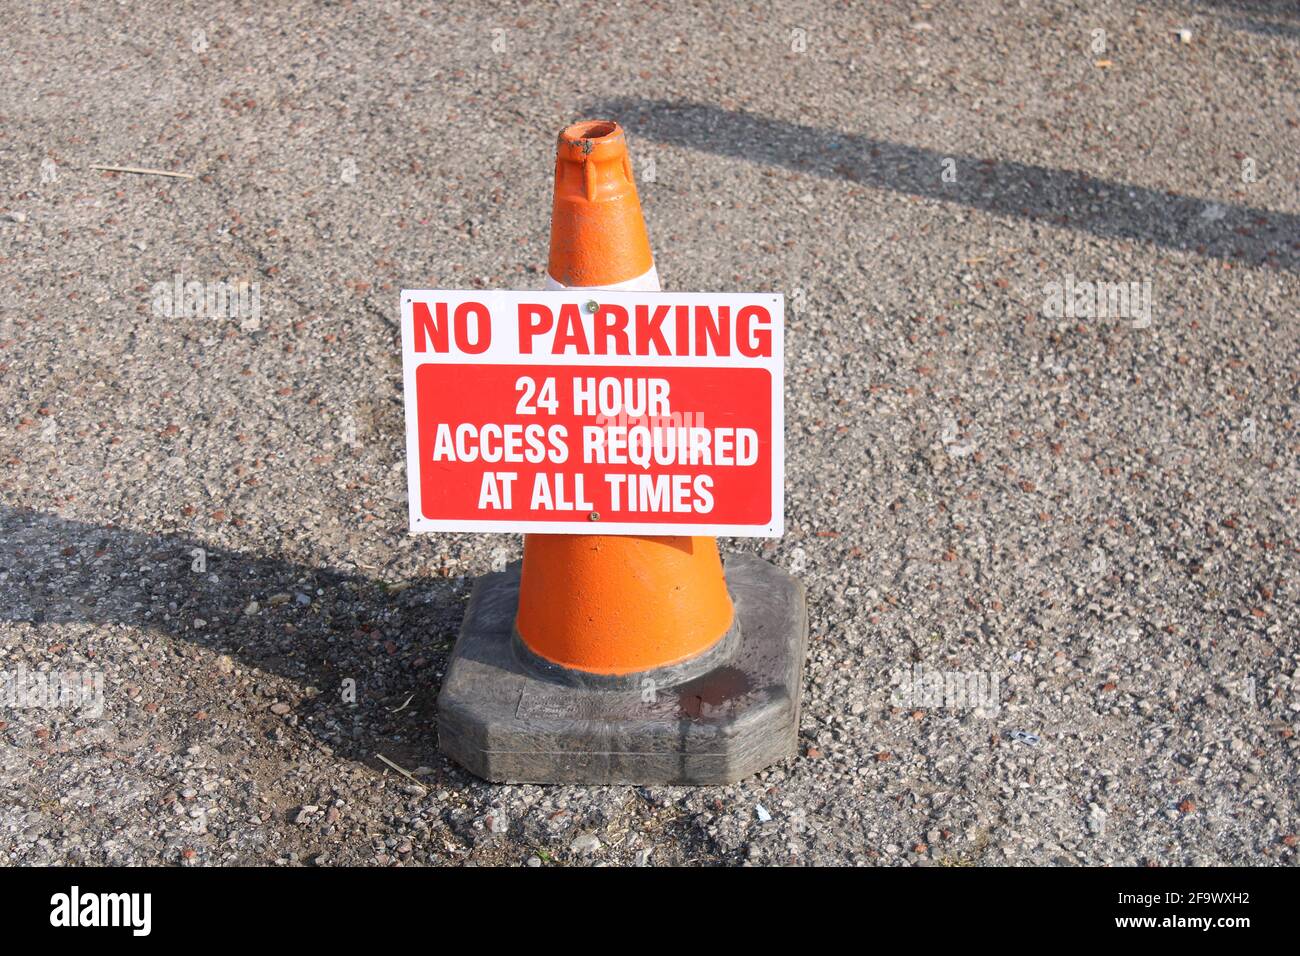 No parking 24 hour access required at all times sign attached to a traffic cone Stock Photo